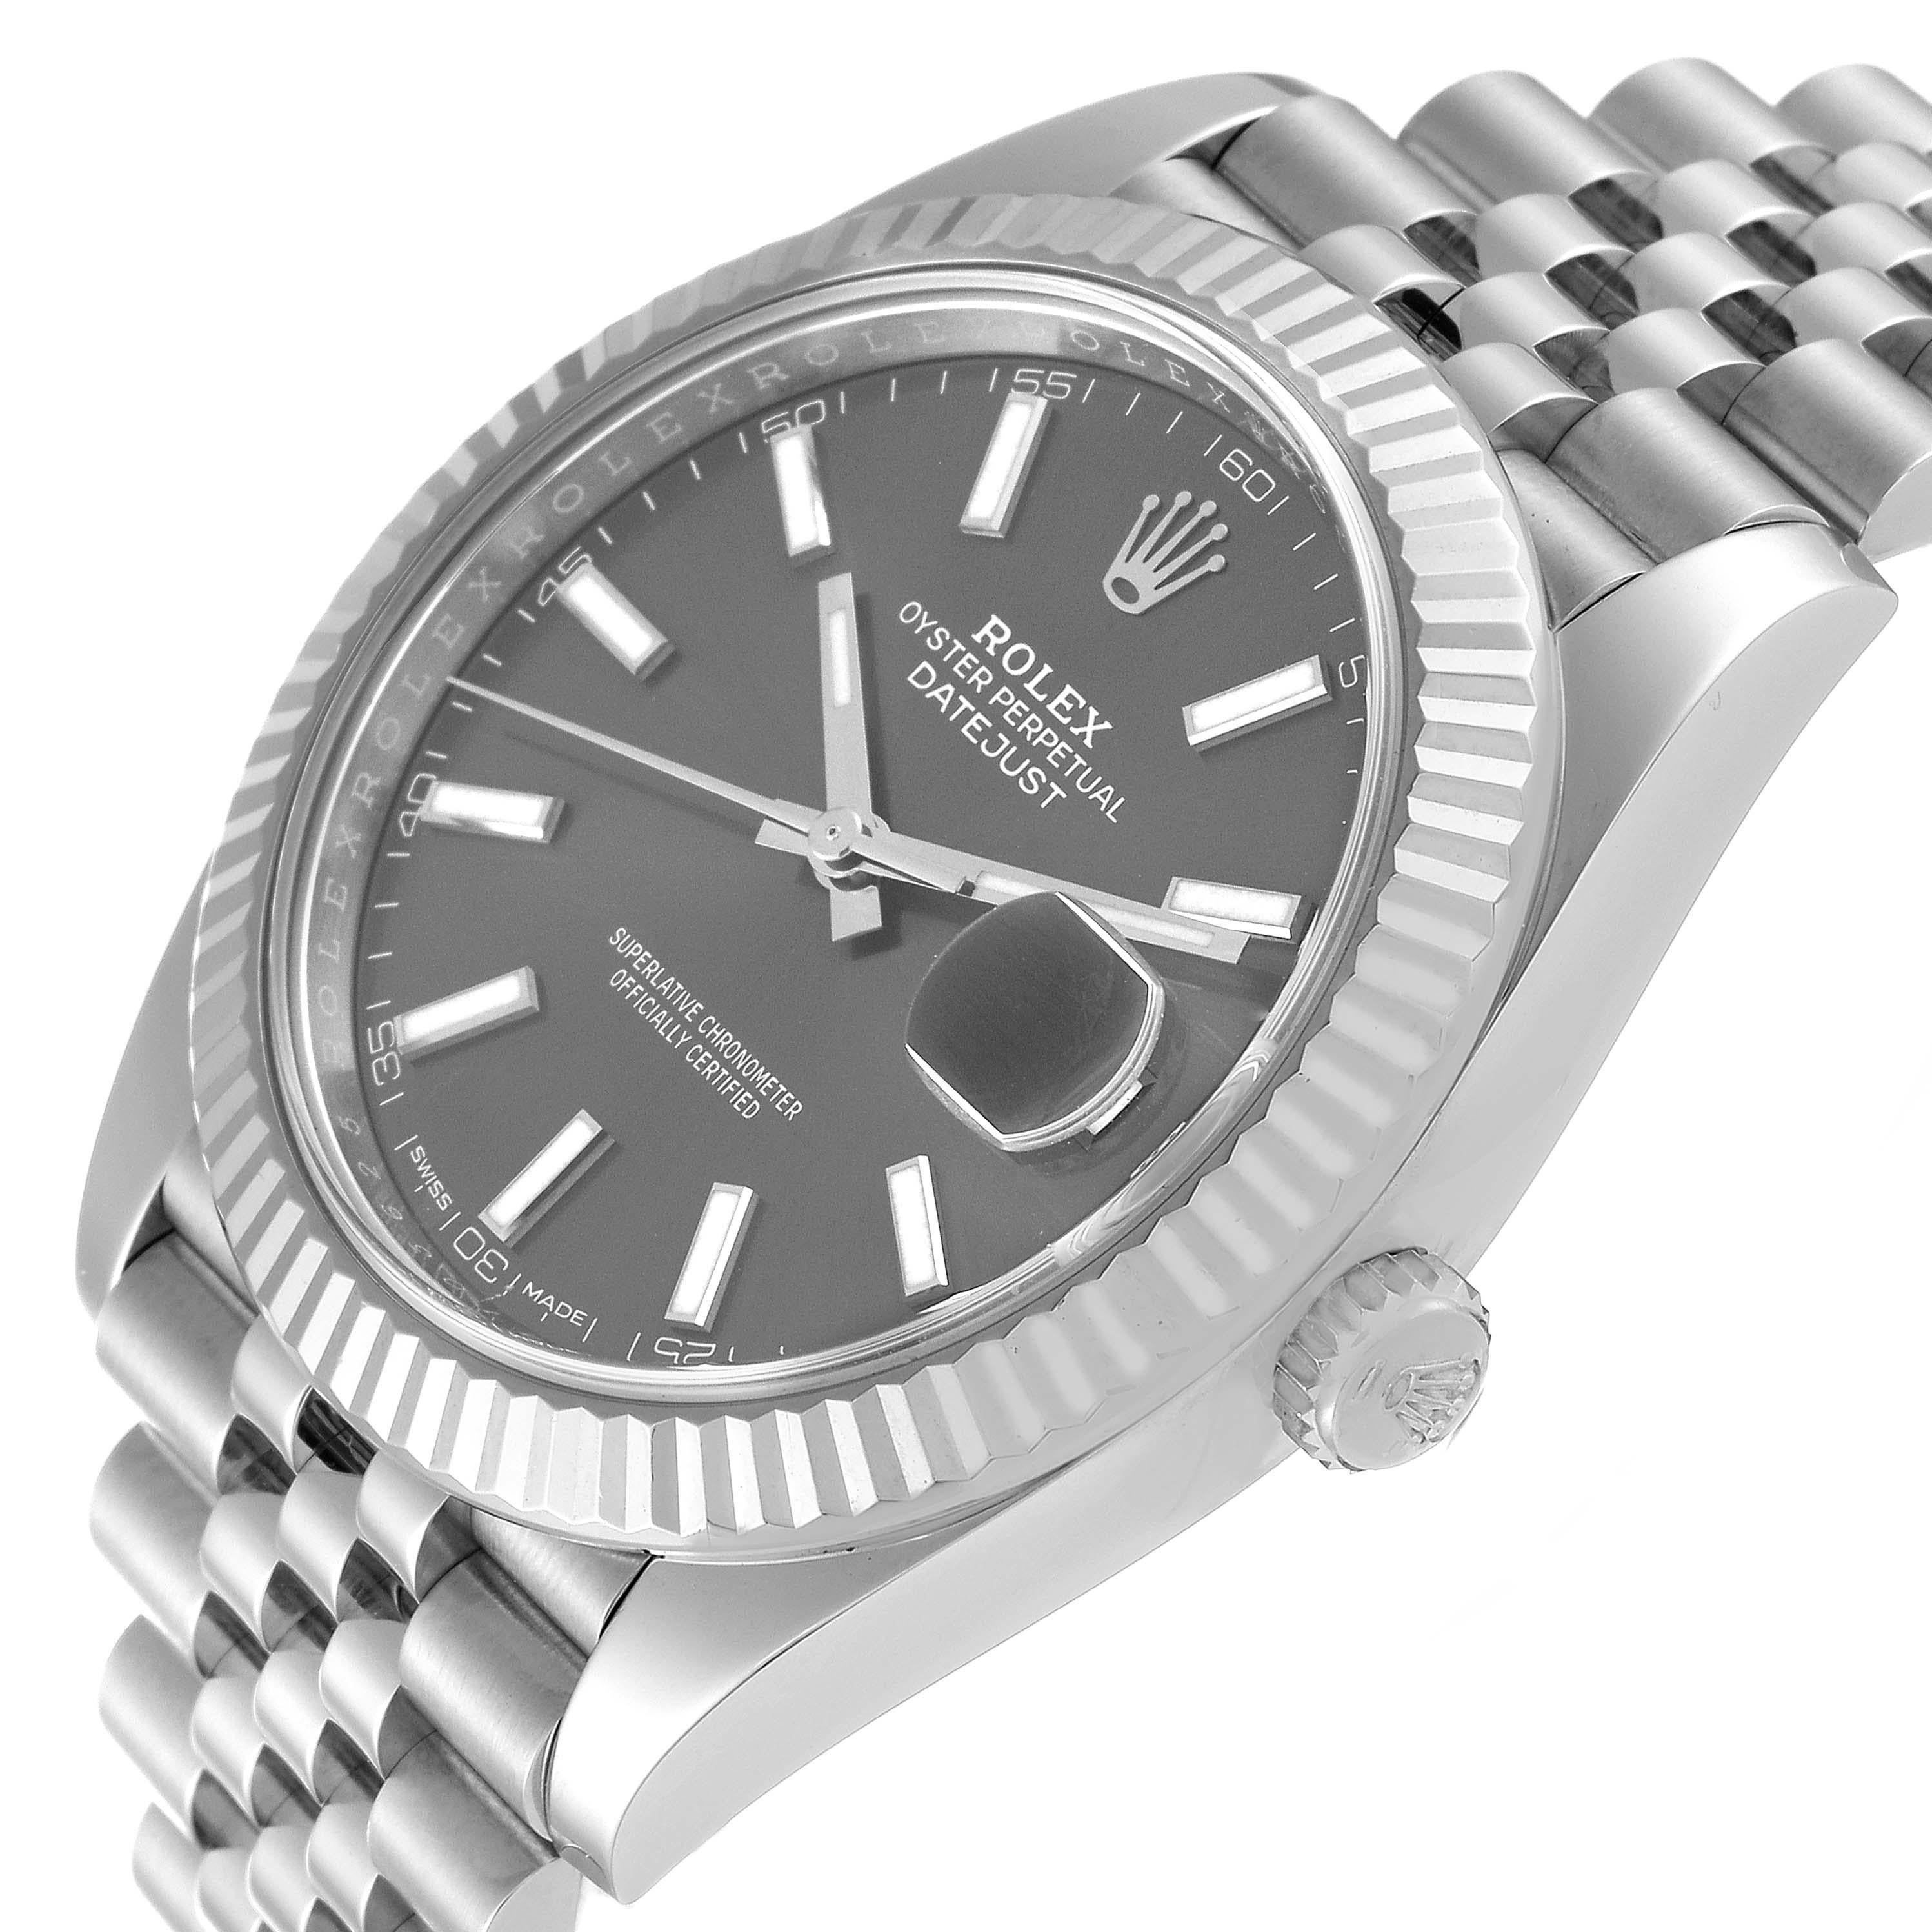 Rolex Datejust 41 Steel White Gold Slate Dial Mens Watch 126334 4